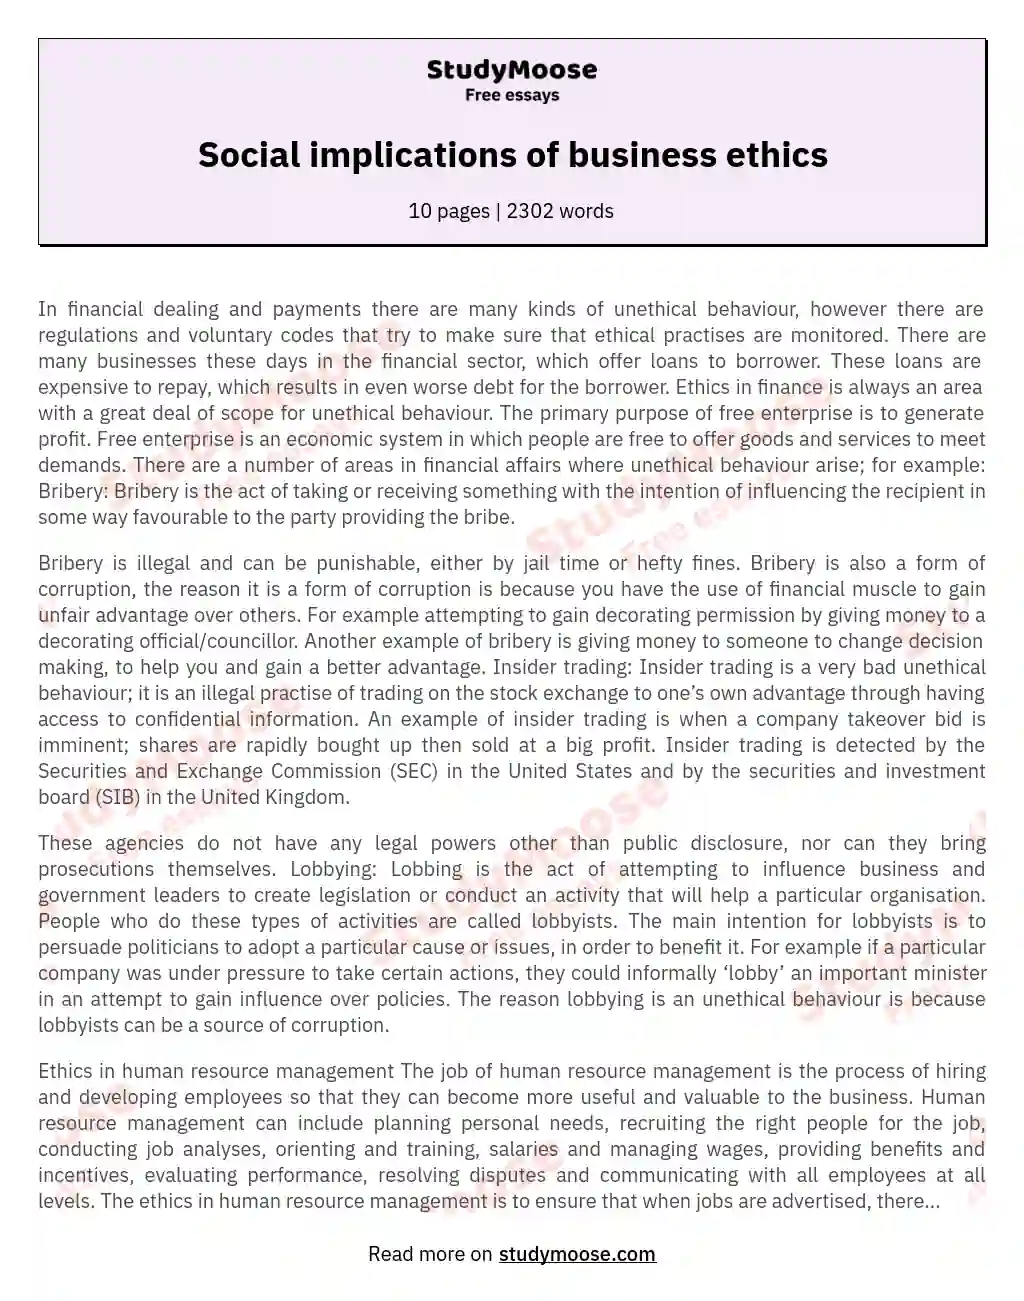 Social implications of business ethics essay